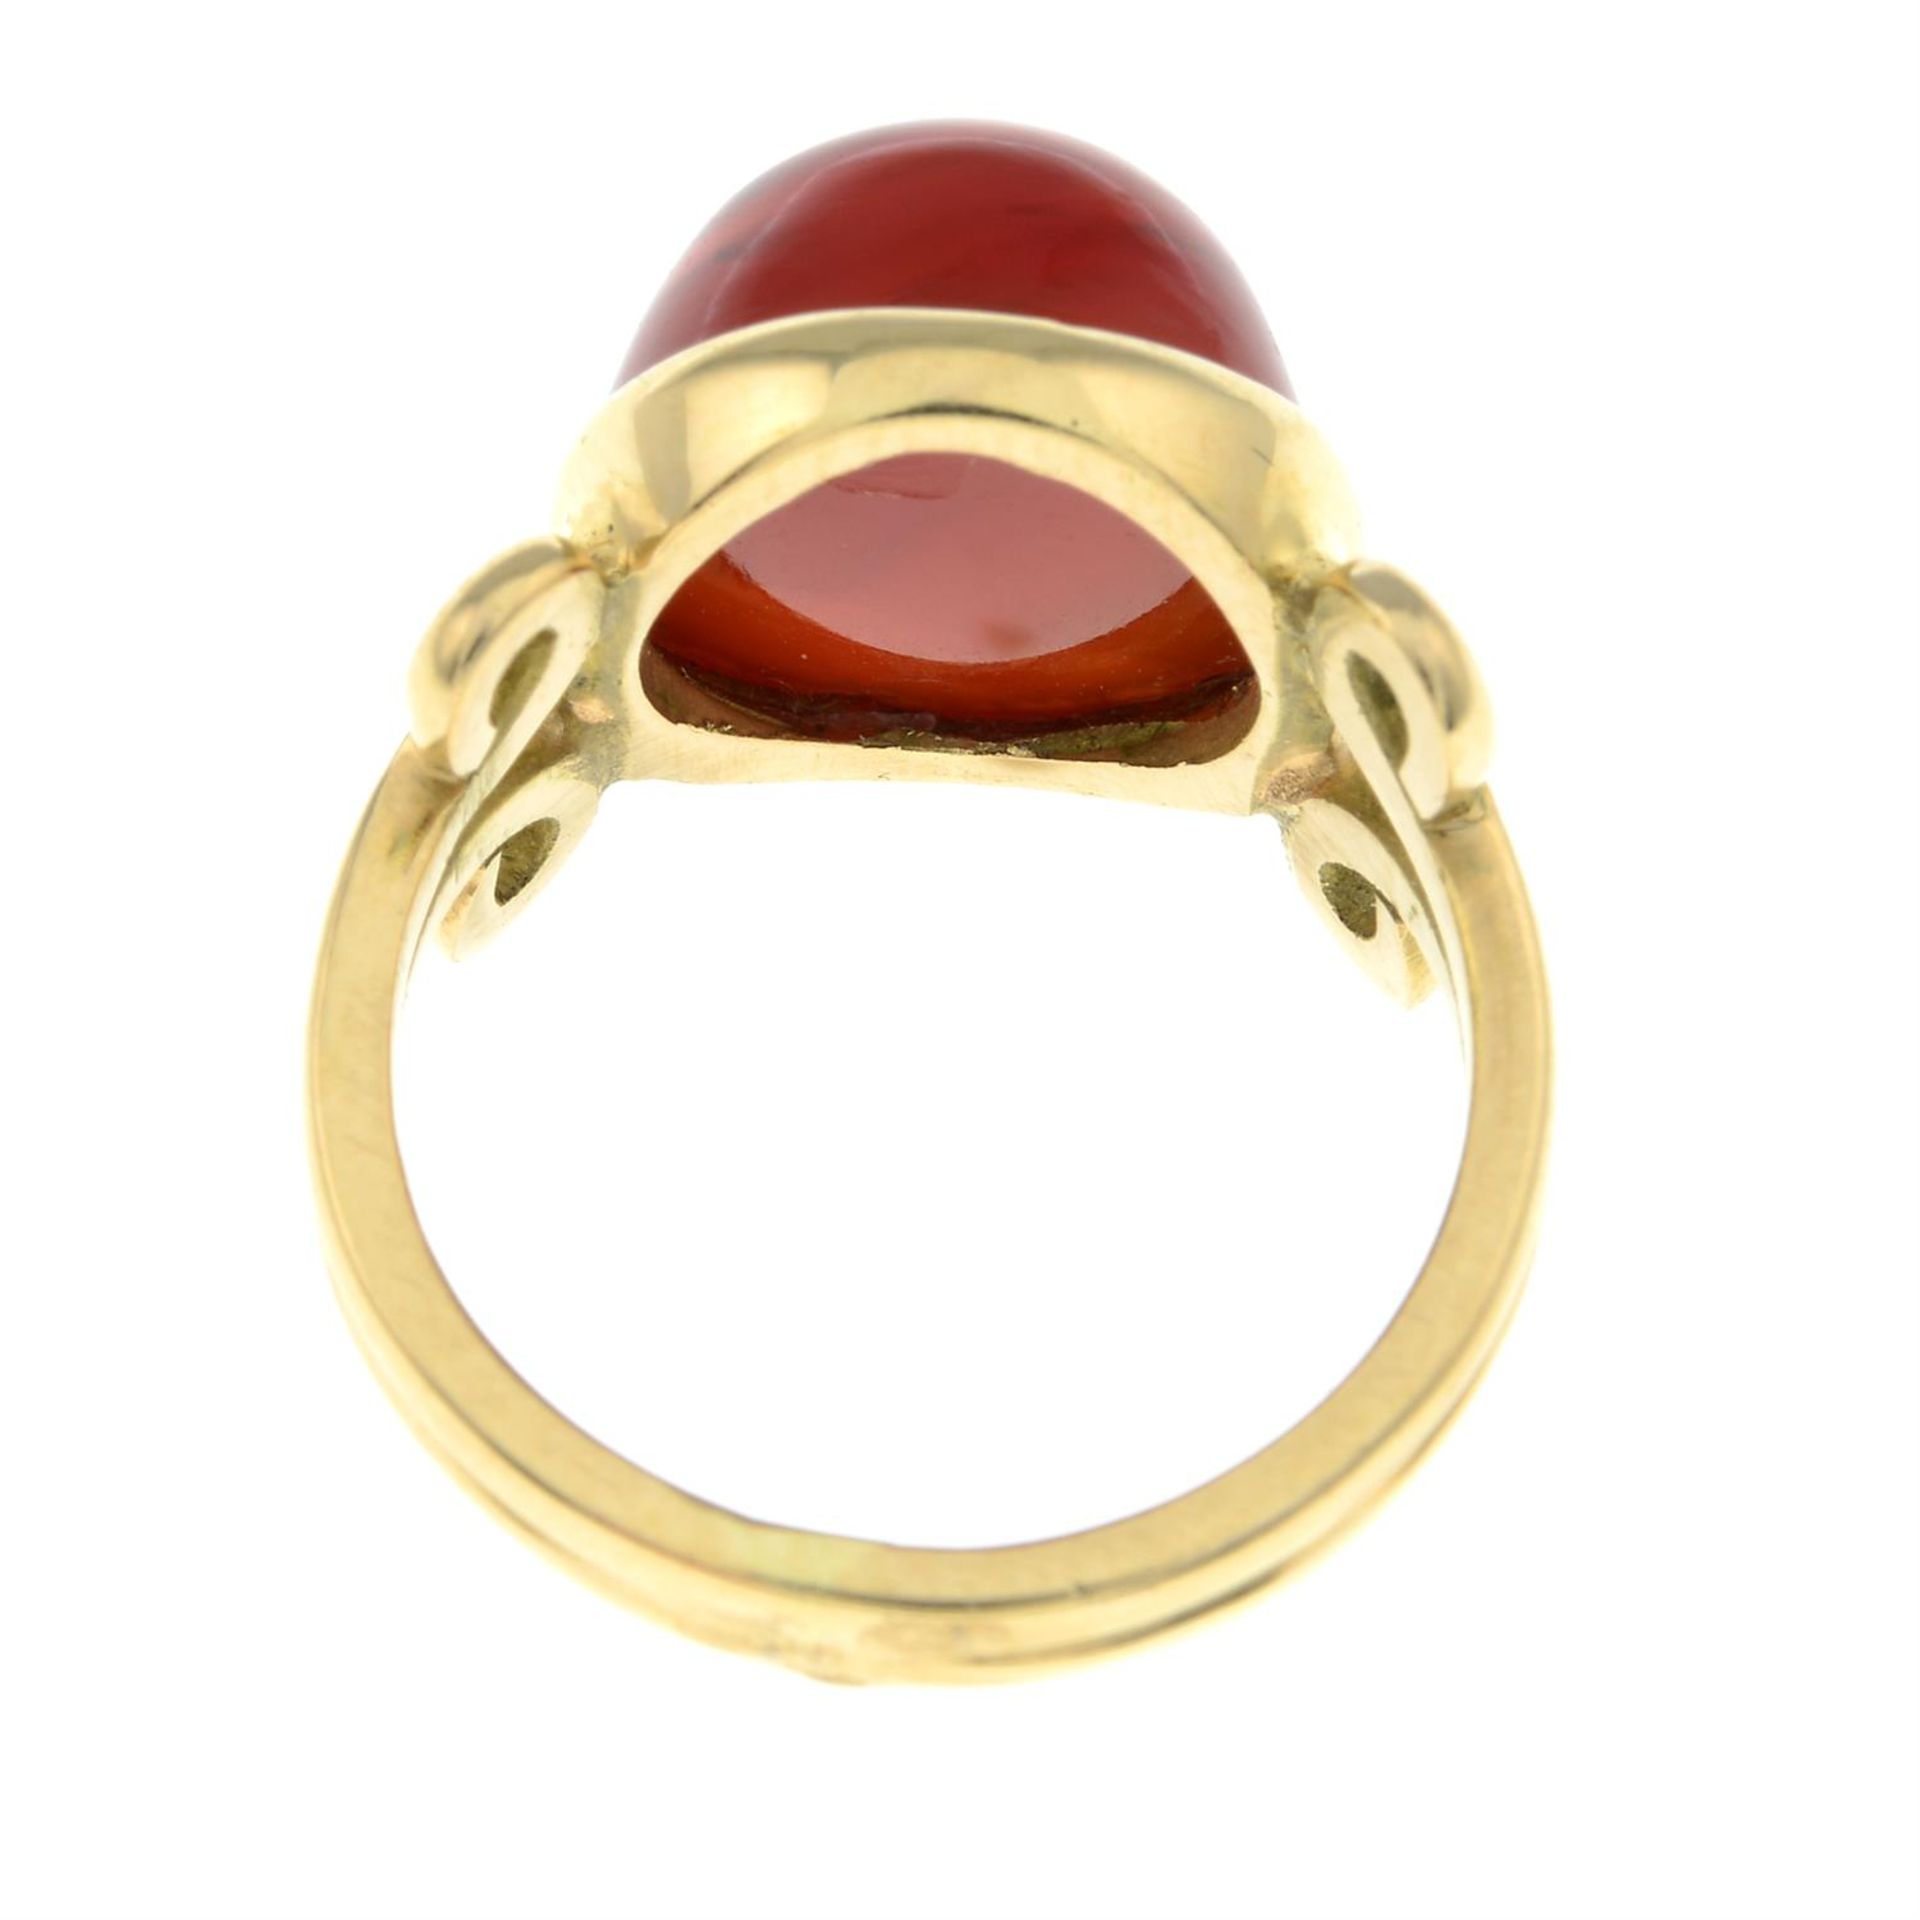 An early to mid 20th century carnelian cabochon dress ring. - Image 2 of 2